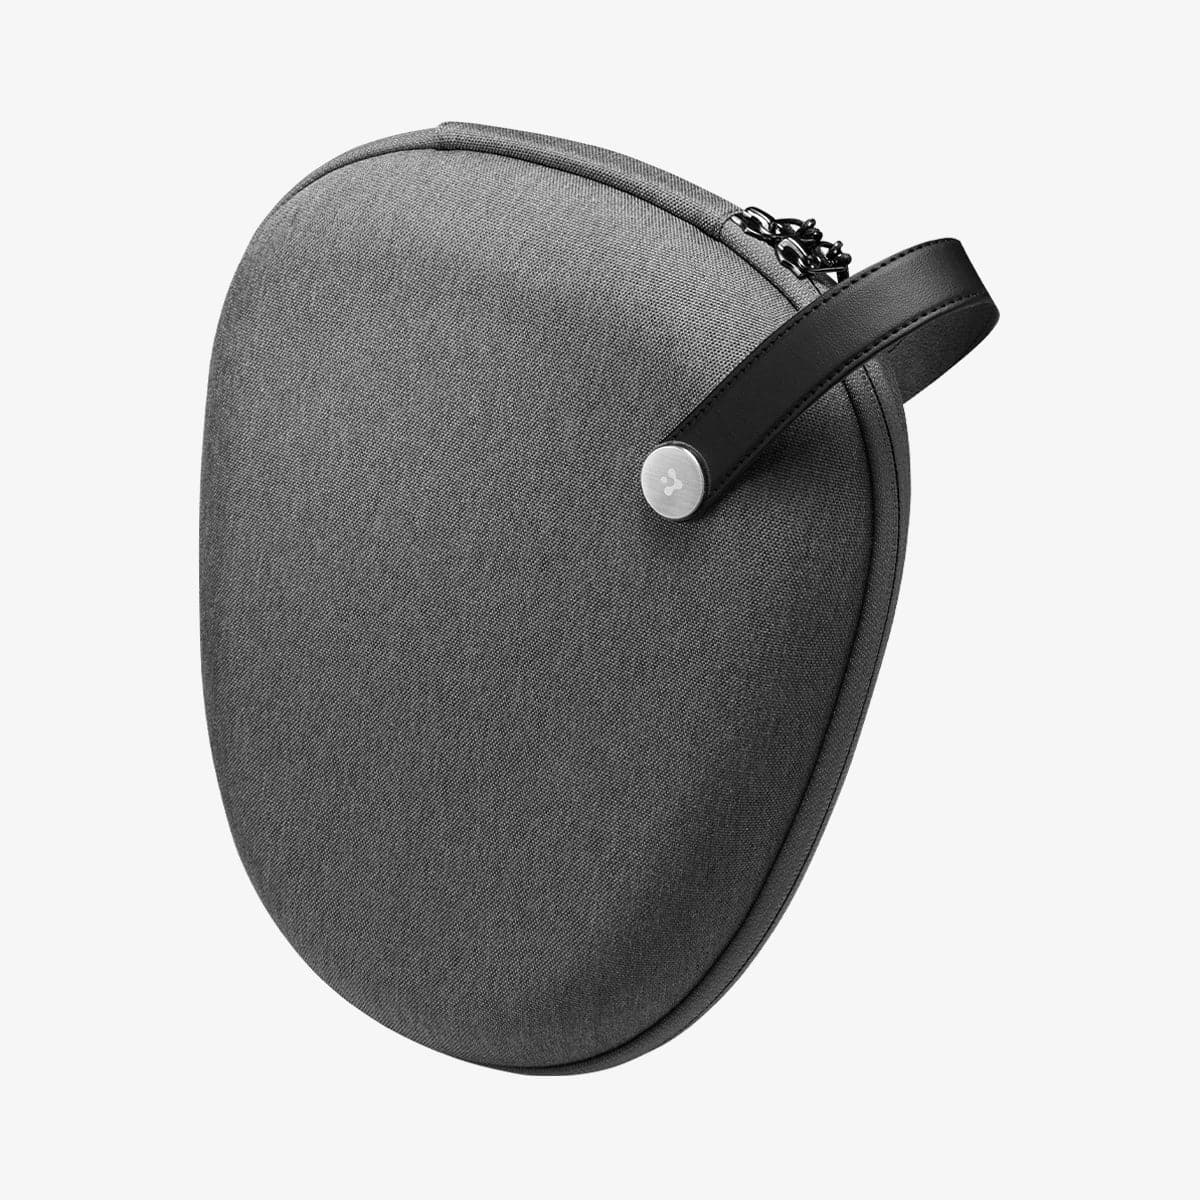 AFA02996 - Airpods Max Klasden Pouch in charcoal gray showing the back and partial side